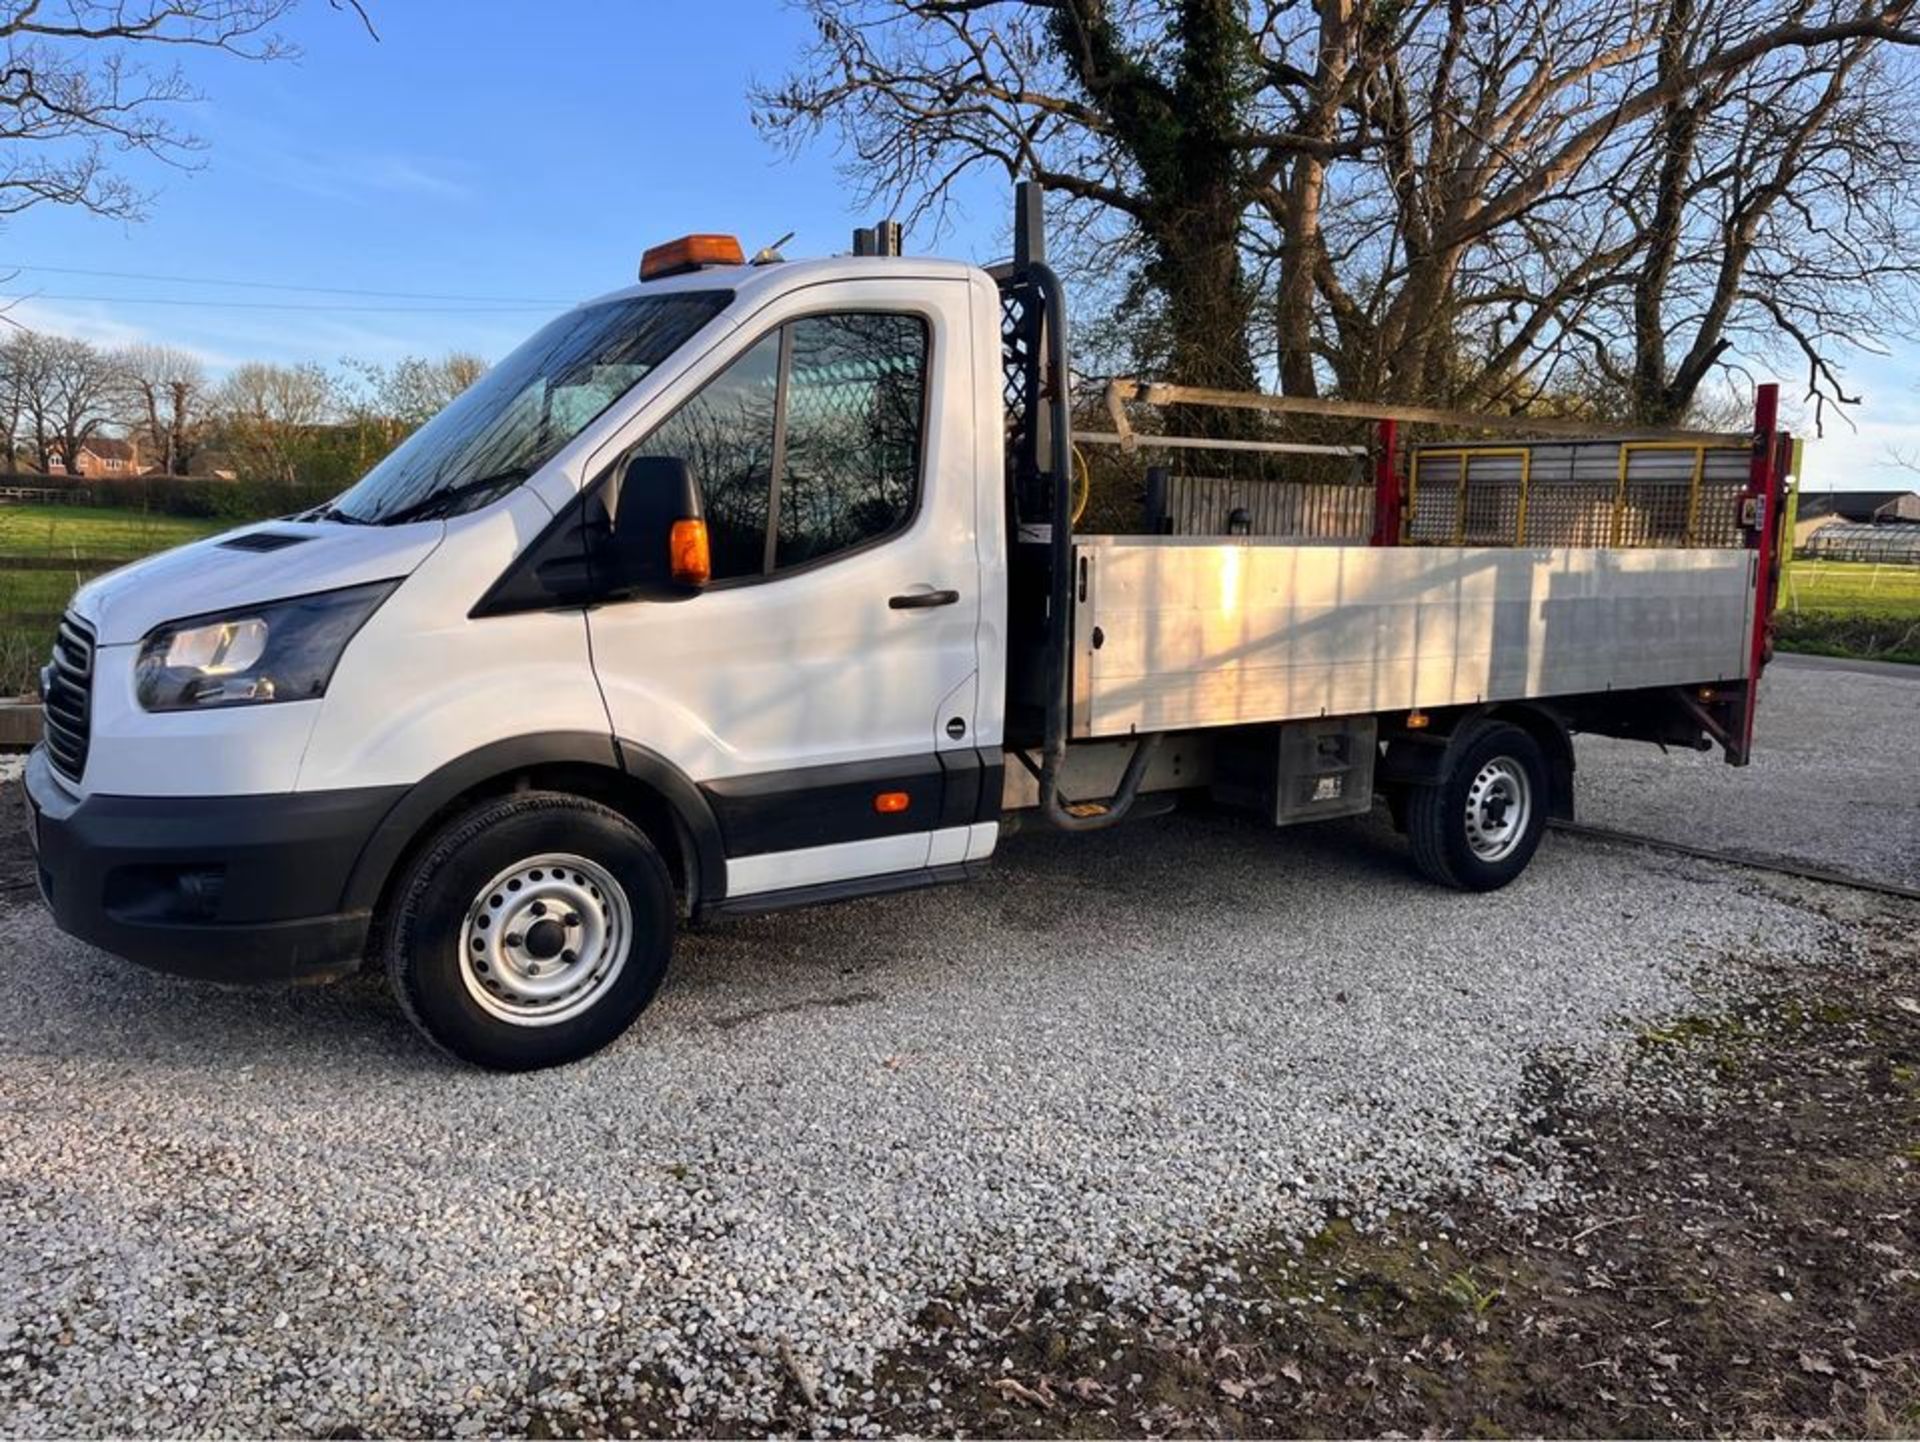 2020 Ford Transit Dropside Truck (LWB) - Image 10 of 11